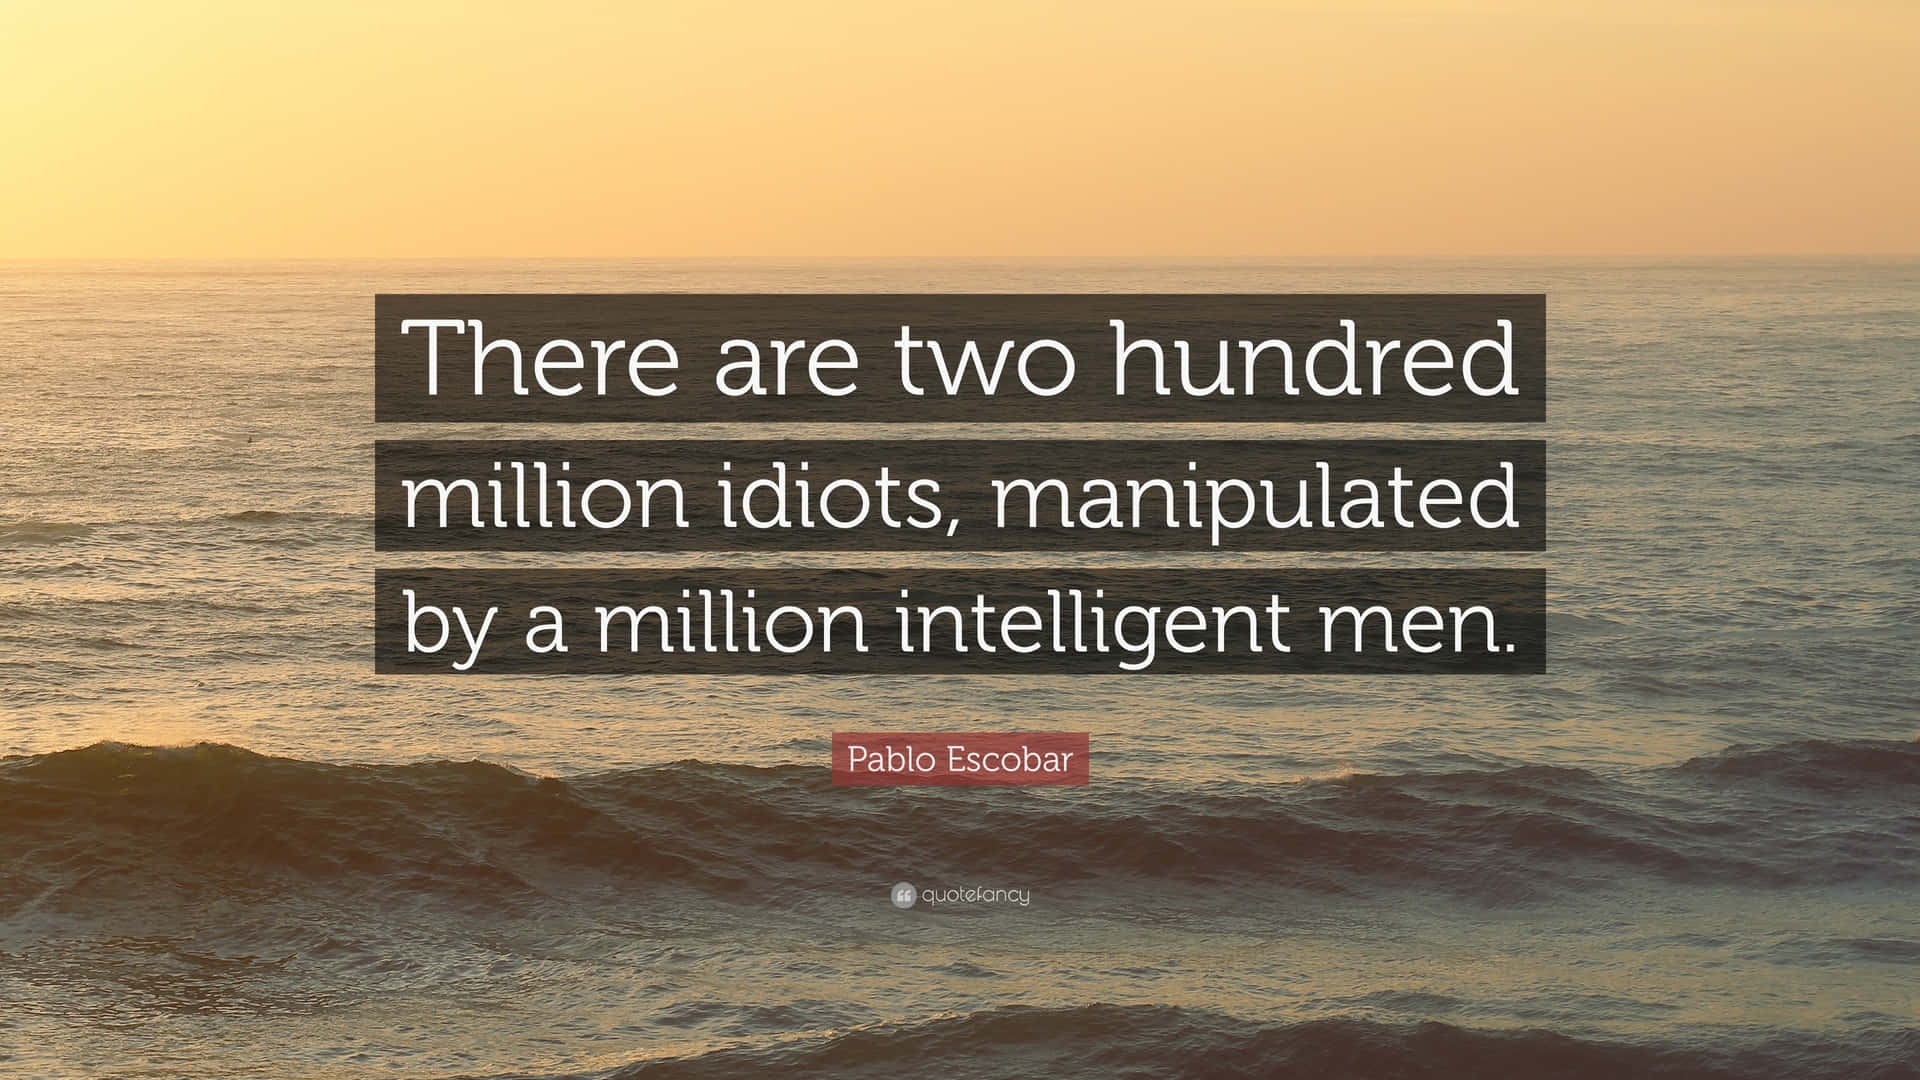 There Are Two Hundred Million Idiots Managed By A Million Intelligent Men